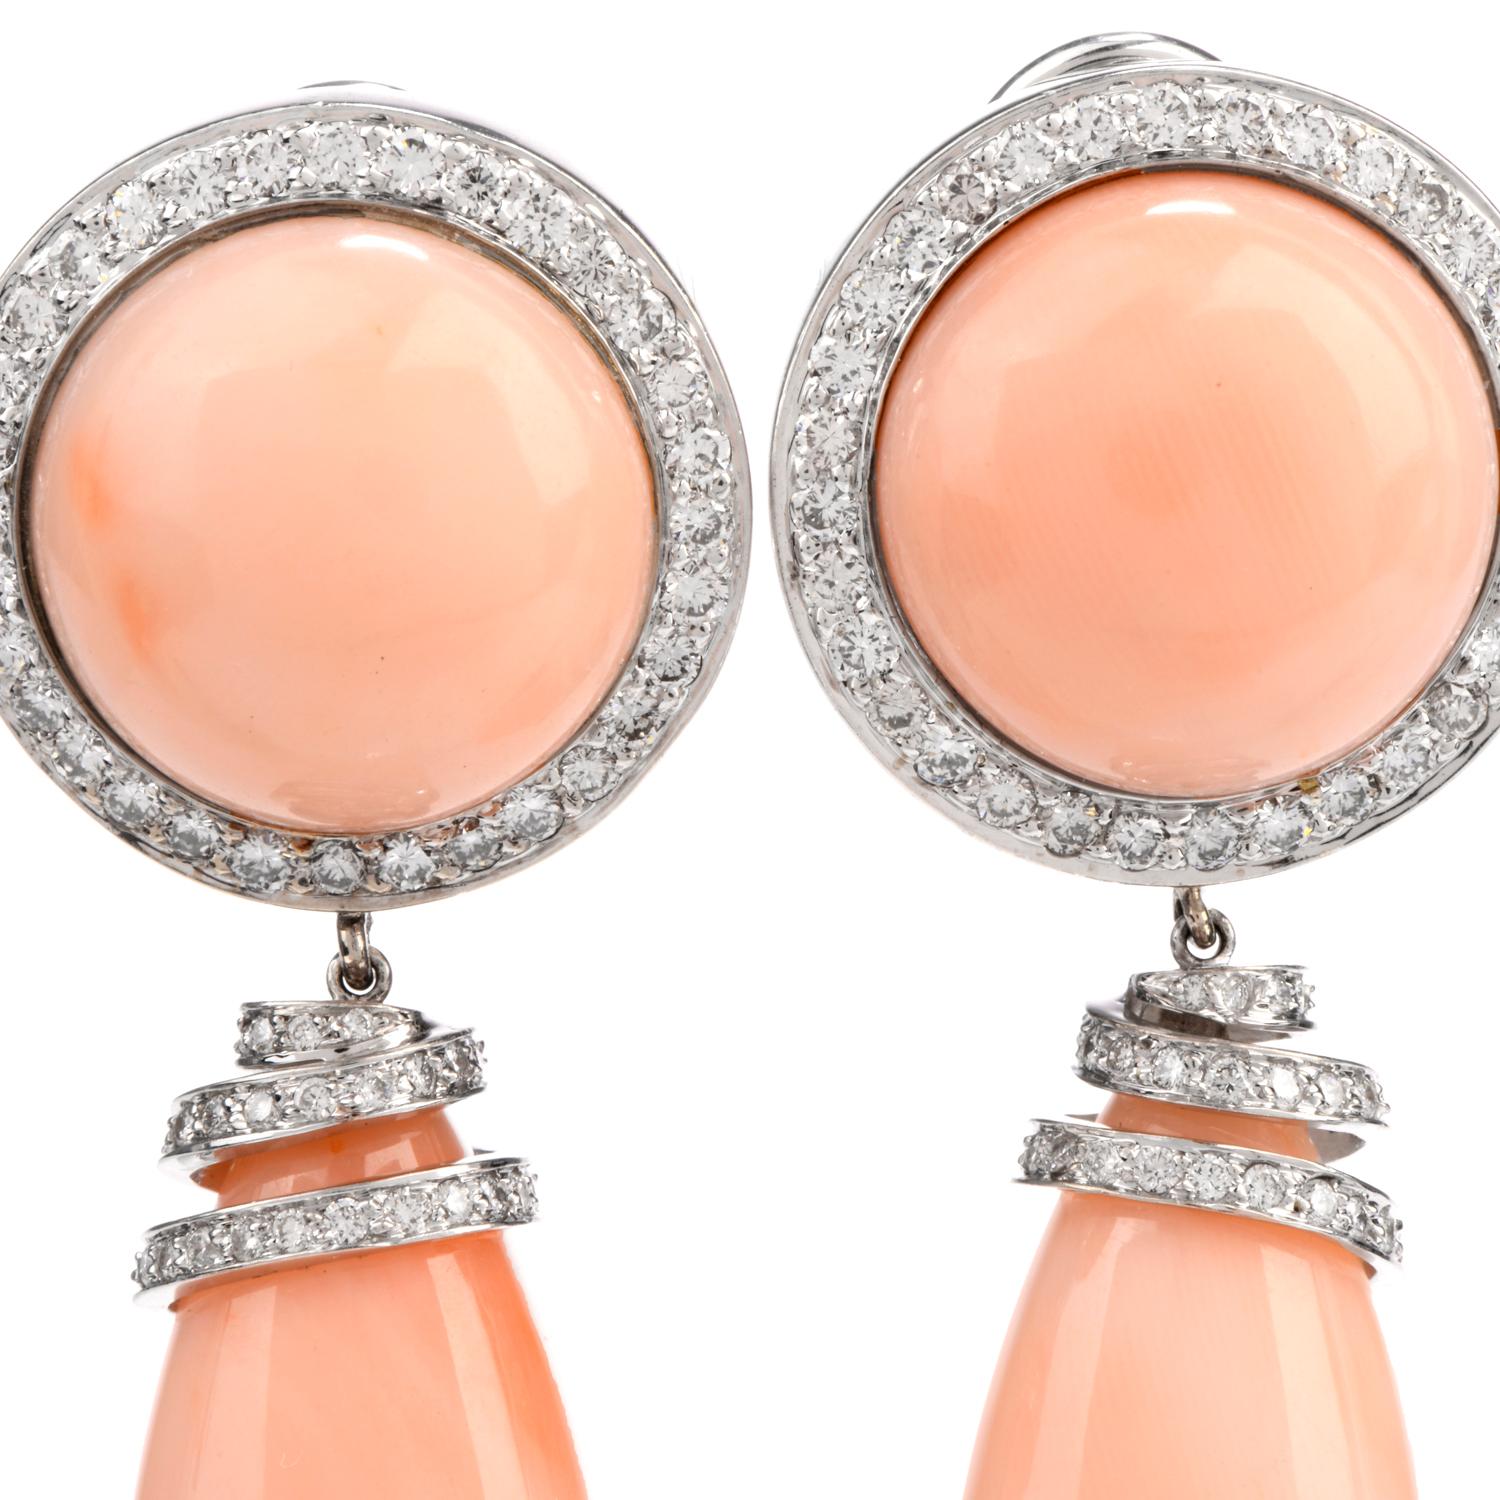  Soft angel hair Pink natural Colored Coral Buttons Clip On to the ear while 

large dangling pear shaped pieces of Coral dangle freely.

Surrounding the round button and creating a whimsical twisting cap are 

contrasting bright white round